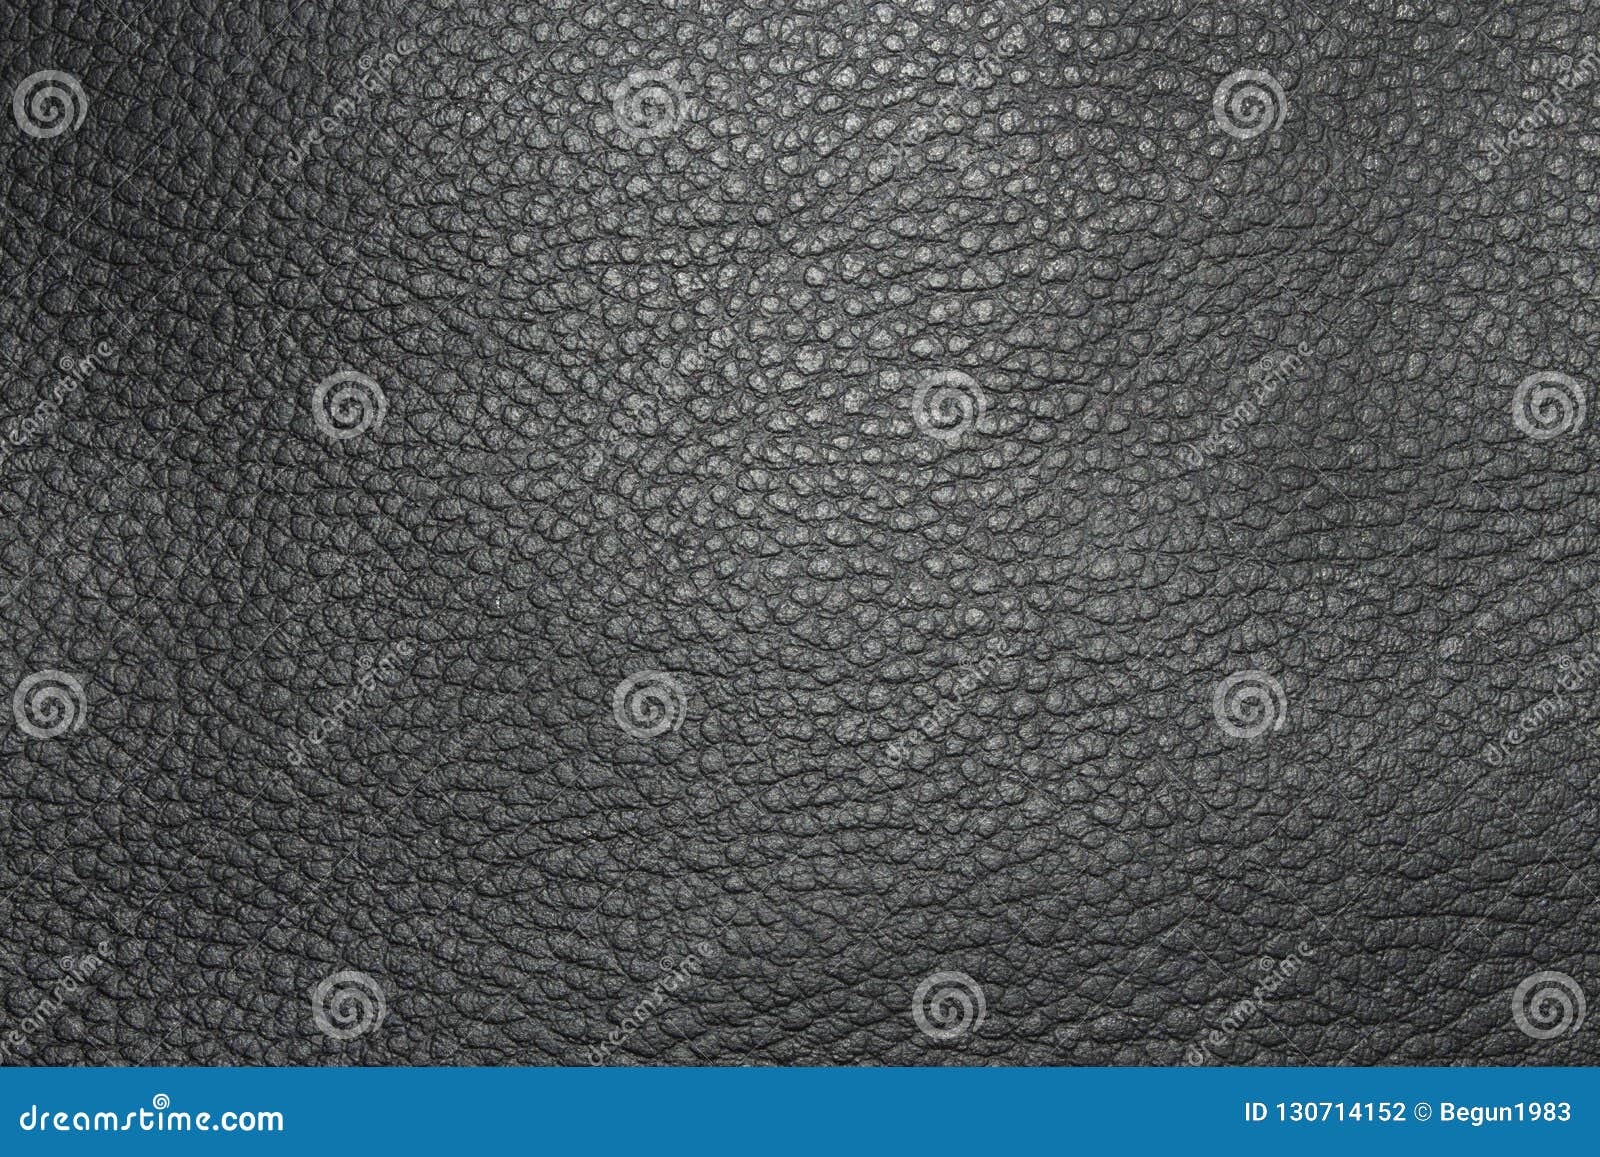 Black Leather Texture Black Leather Texture Black Leather Background 130714152 